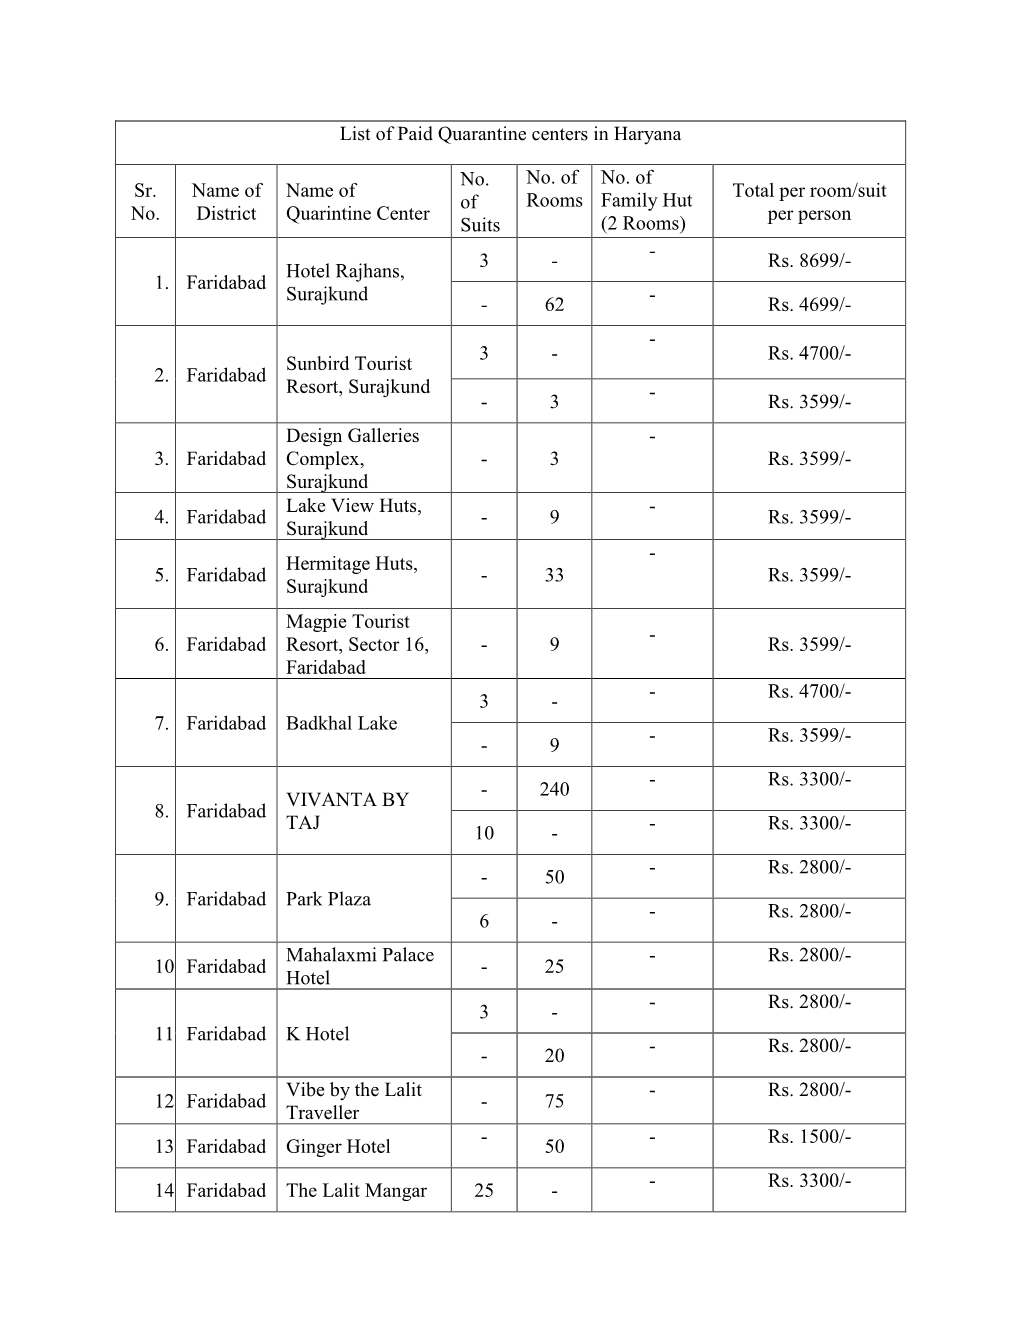 List of Paid Quarantine Centers in Haryana Sr. No. Name of District